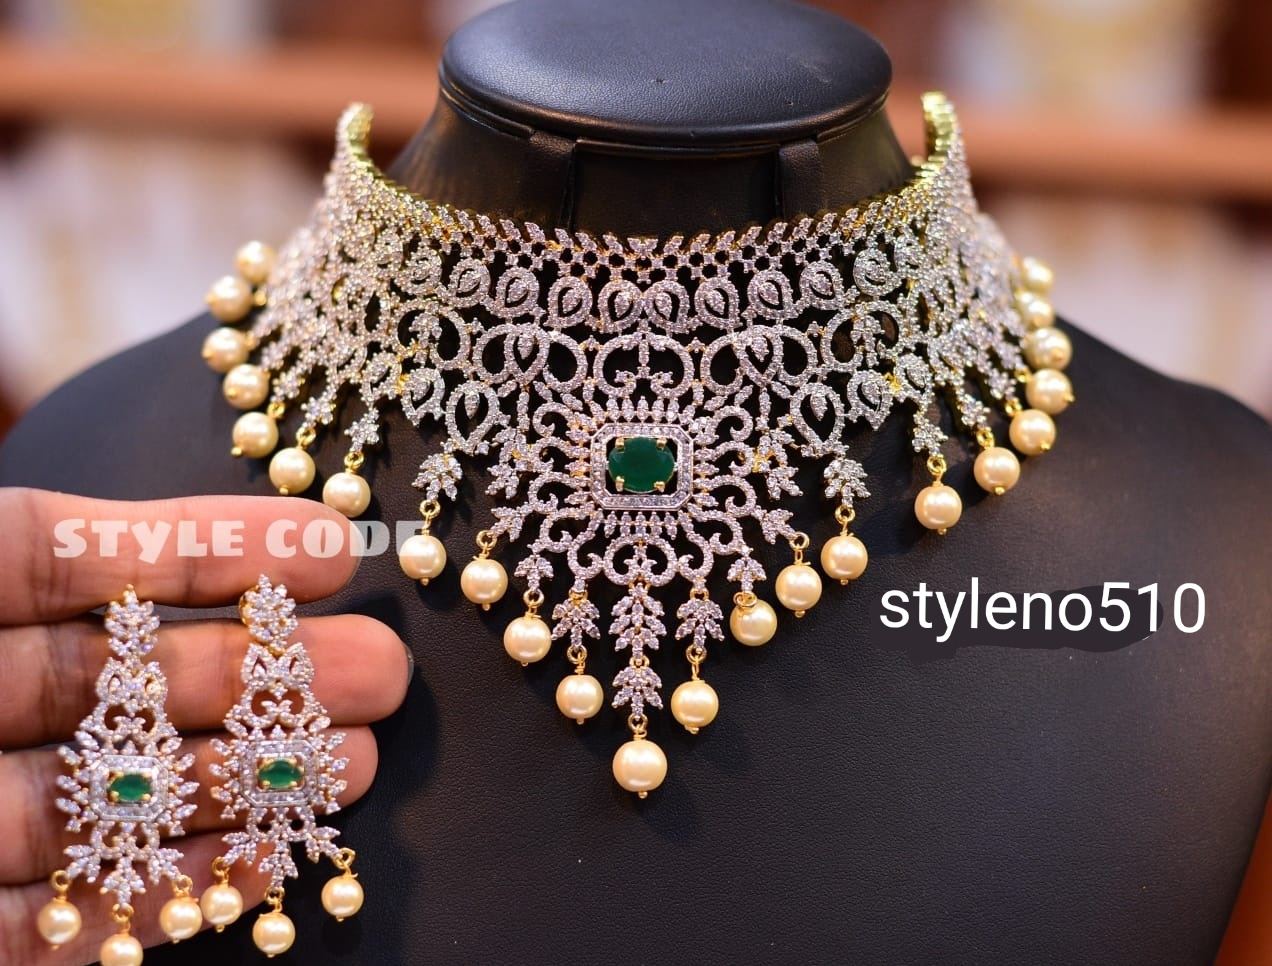 New Collection One Gram Gold 2020 - Indian Jewelry Designs